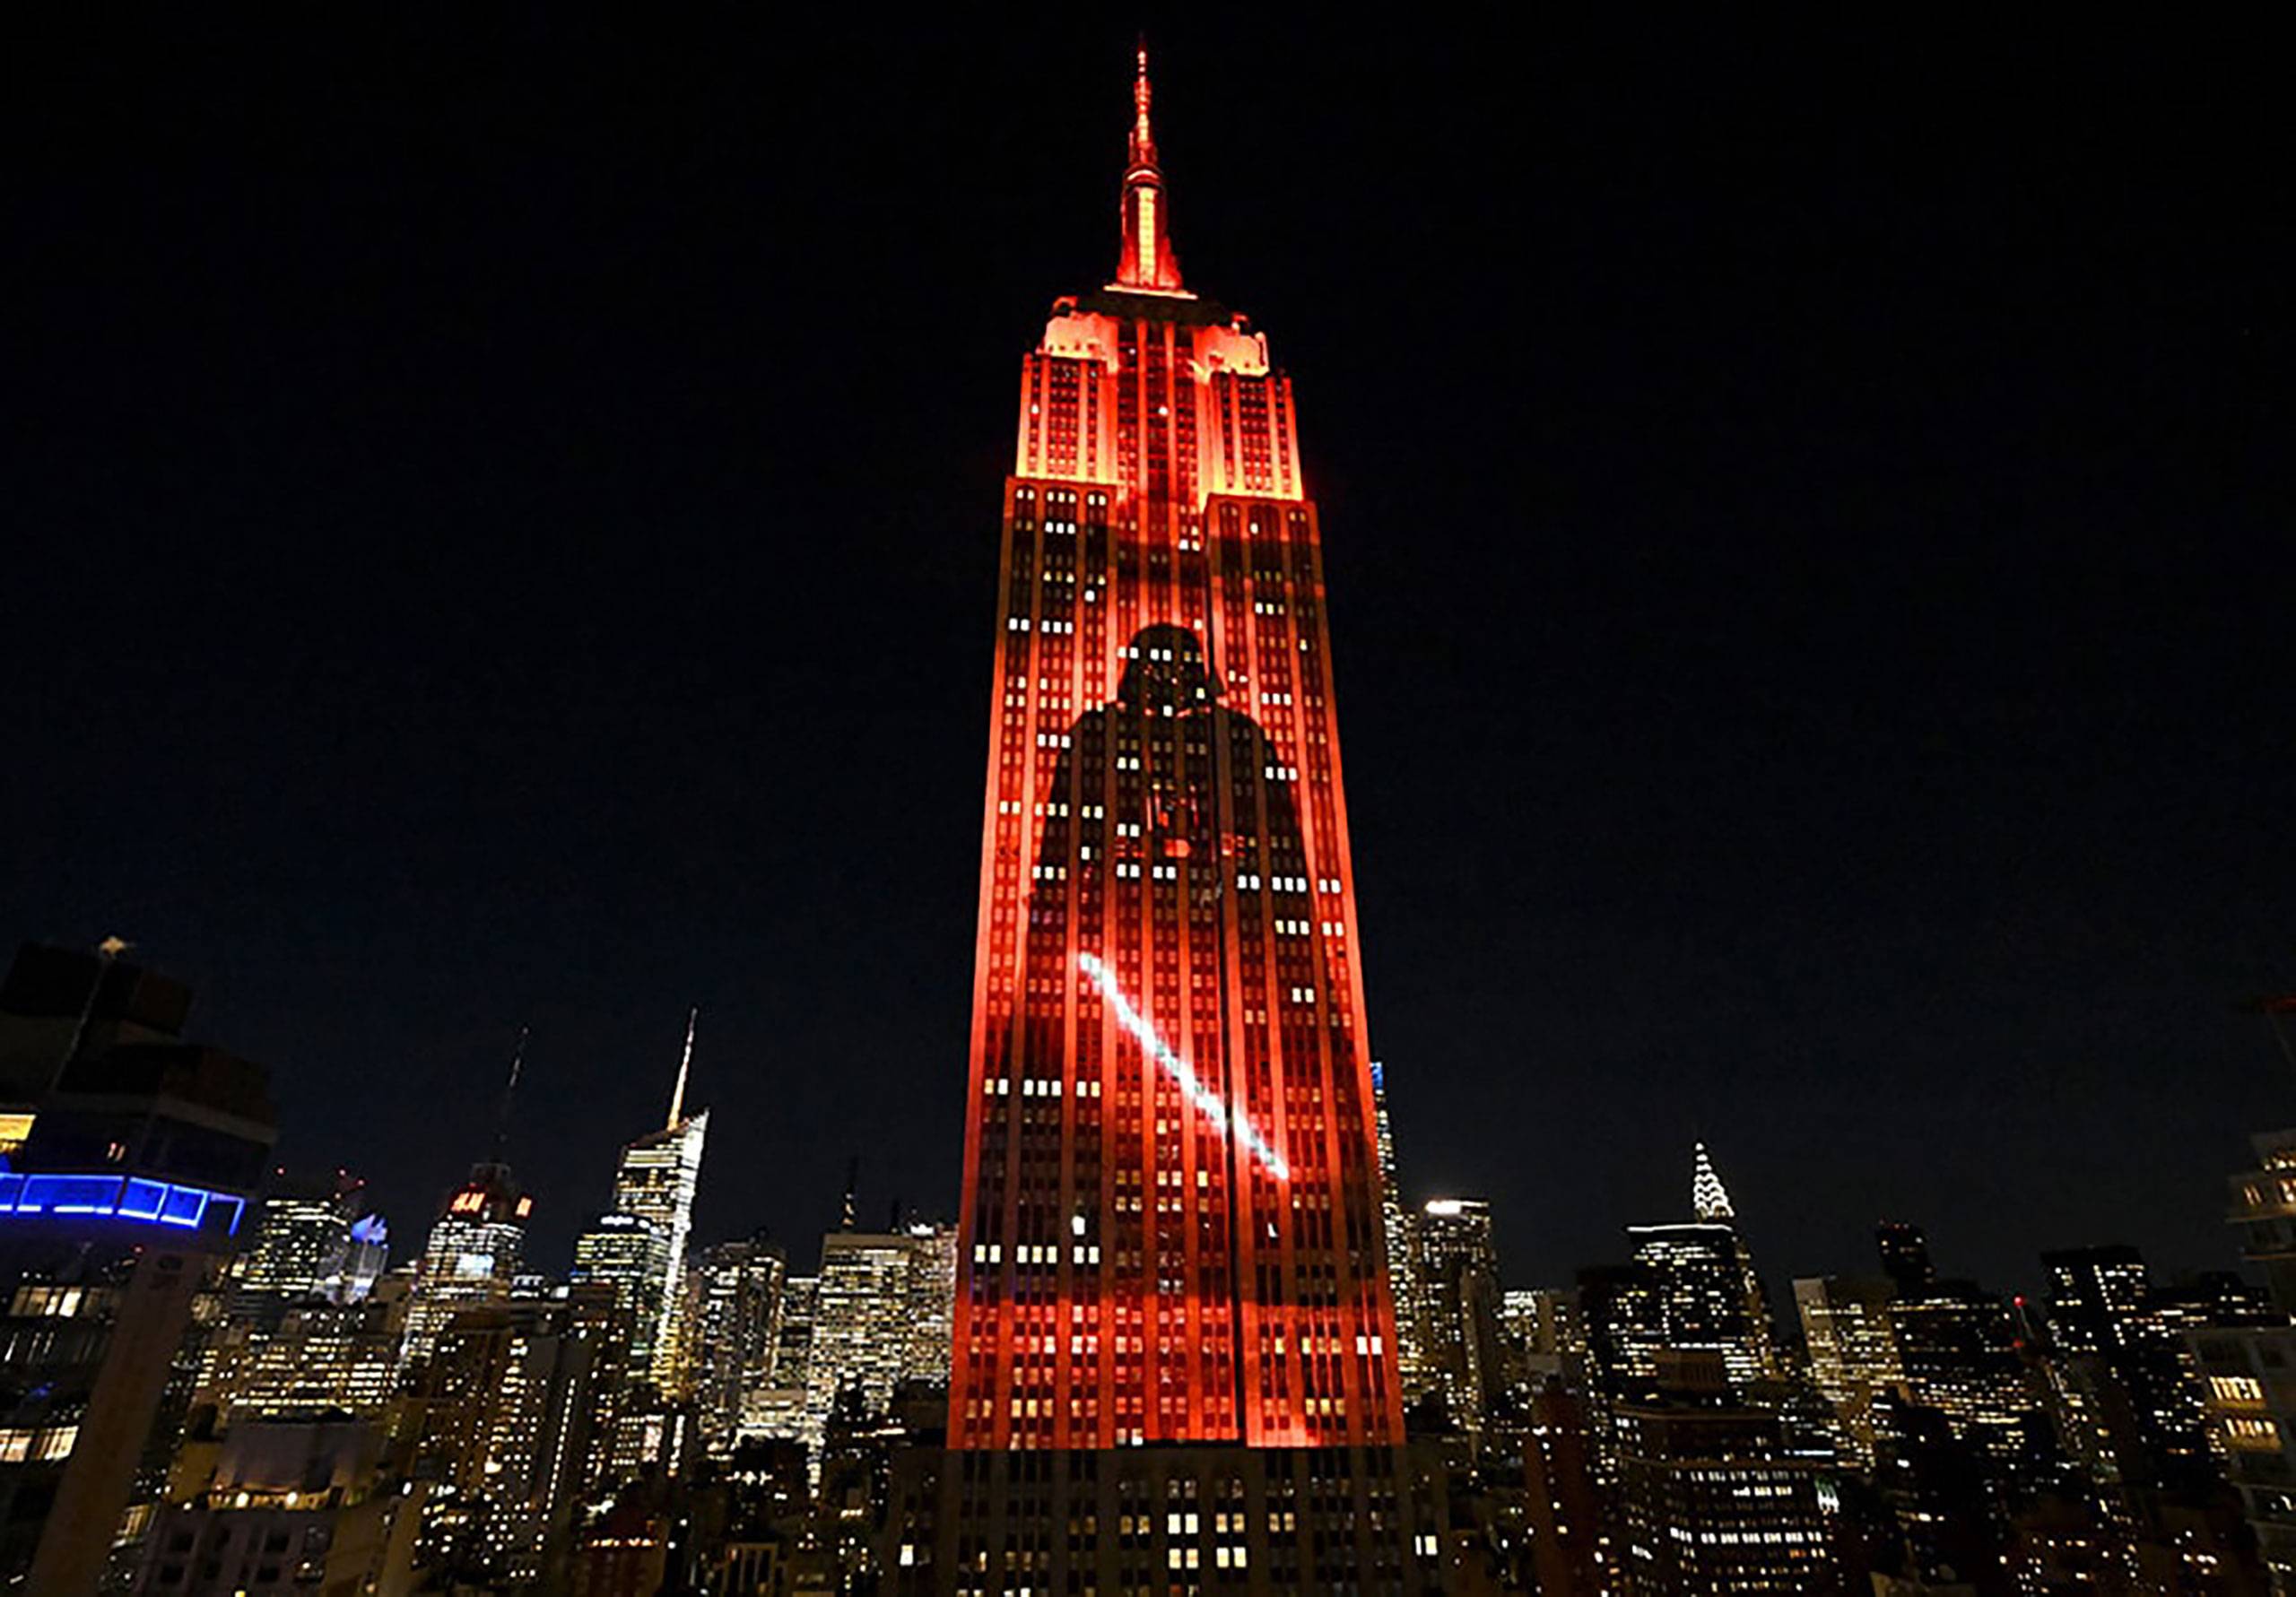 Star Wars light show takes over the Empire State Building in New York City